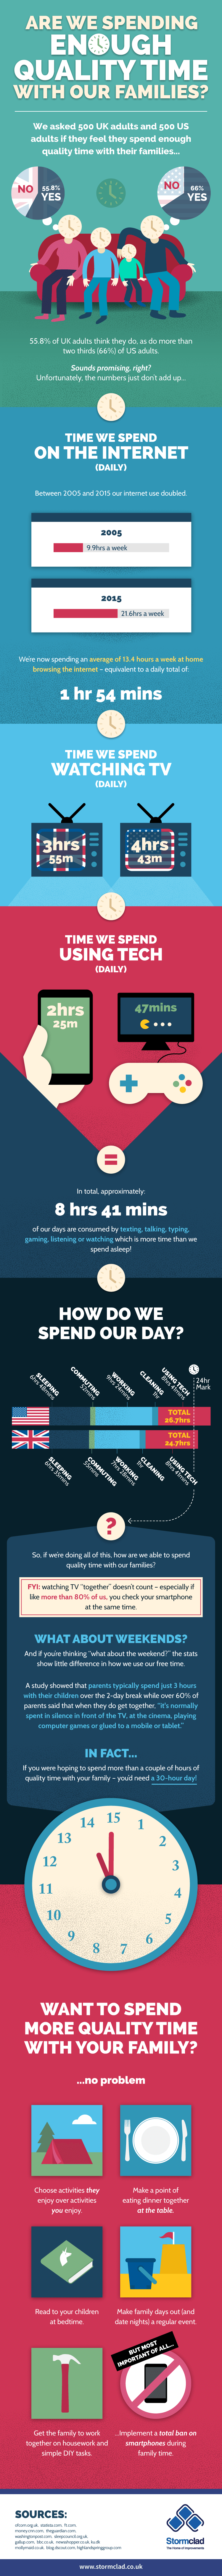 Do You Spend Enough *Quality* Time With Your Family? - #infographic